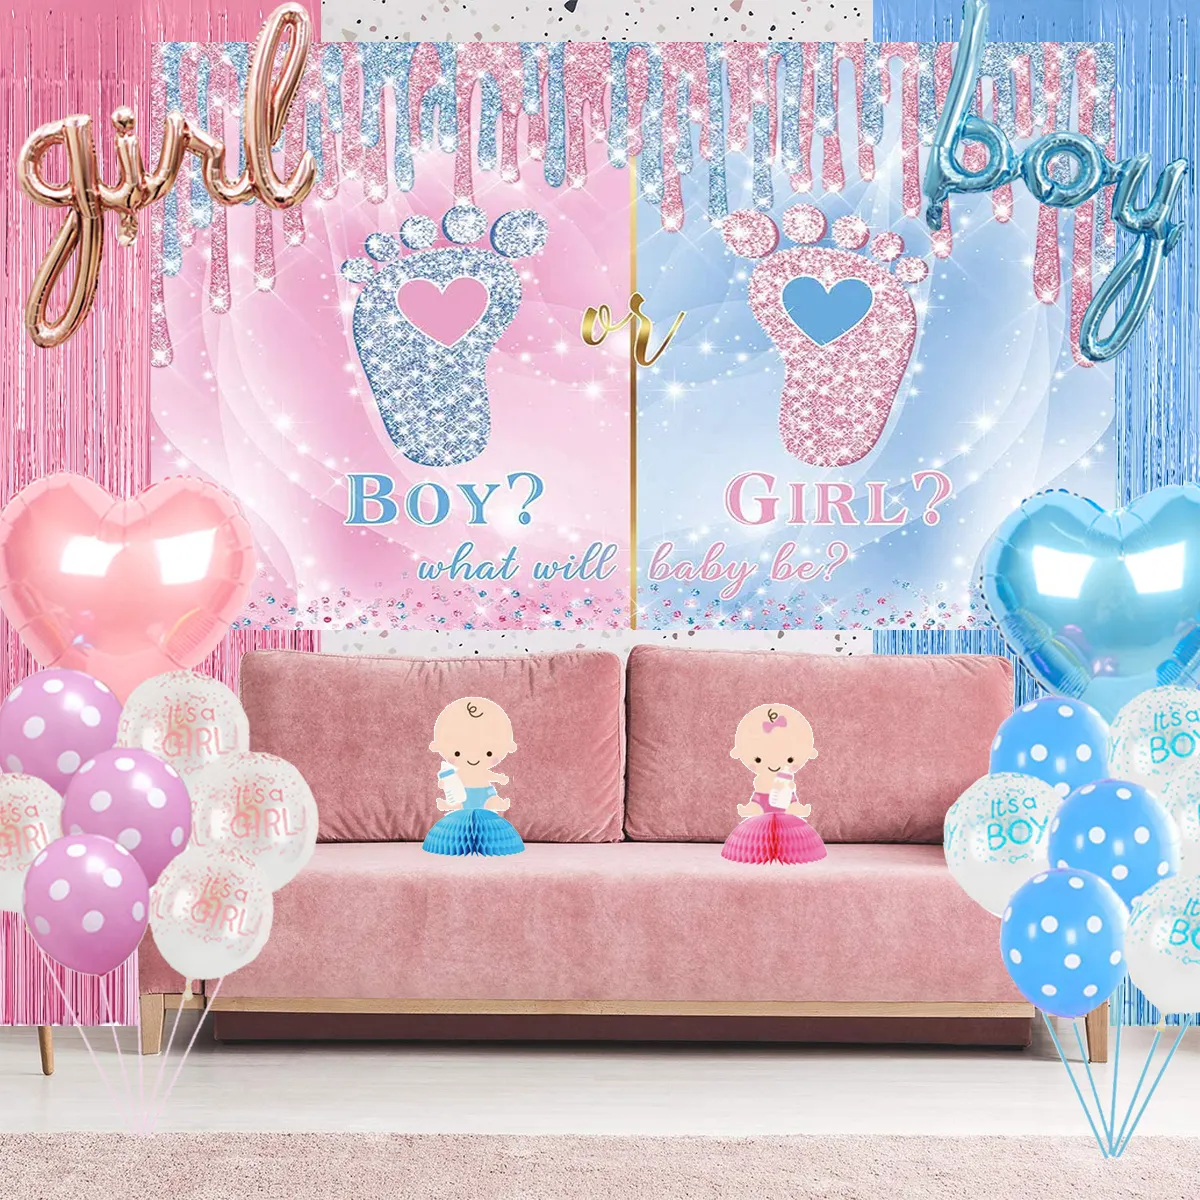 Gender Reveal PARTYCOOL Gender Reveal Decoration Party Gender Reveal Balloon Background Baby Shower Party Boy And Girl Party Supplies